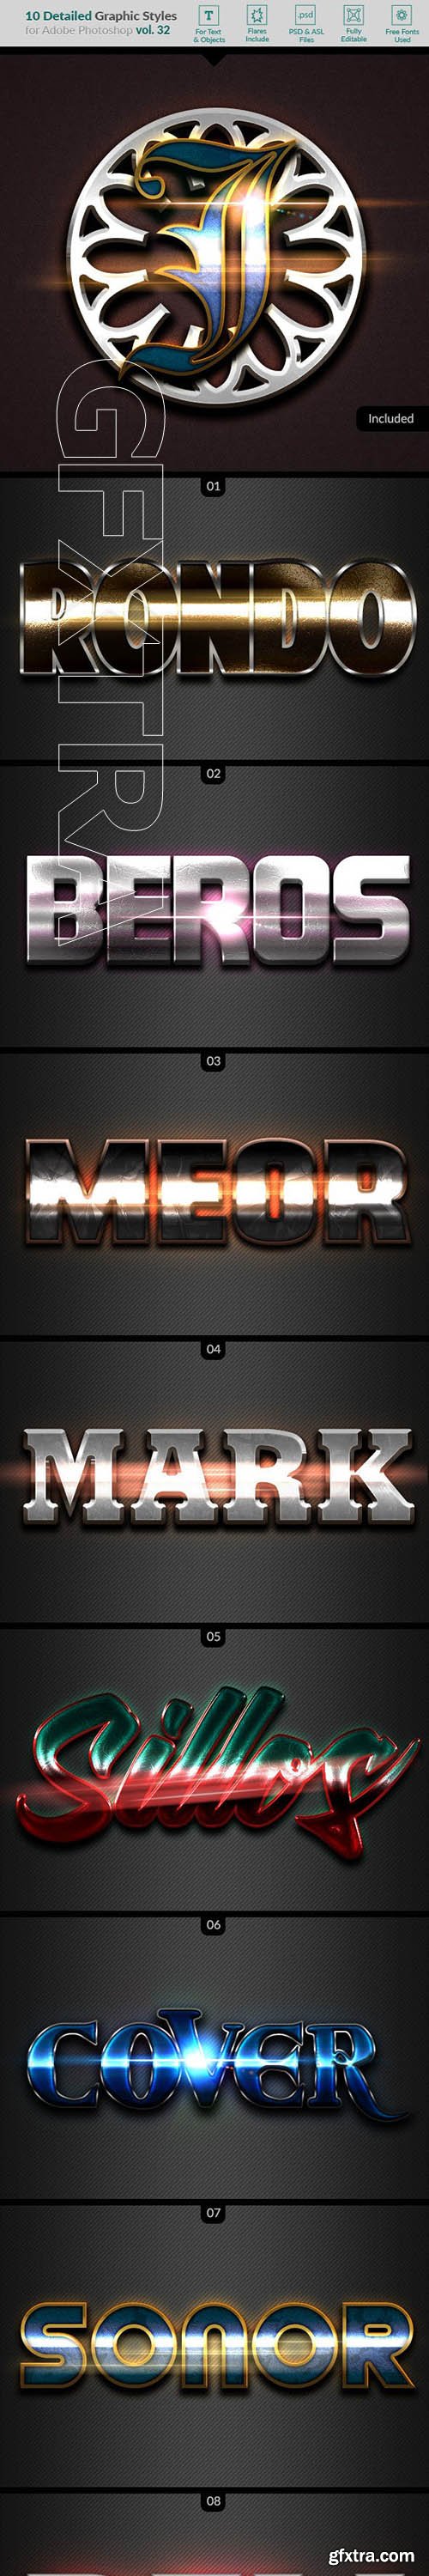 GraphicRiver - 10 Text Effects Vol 32 22988807